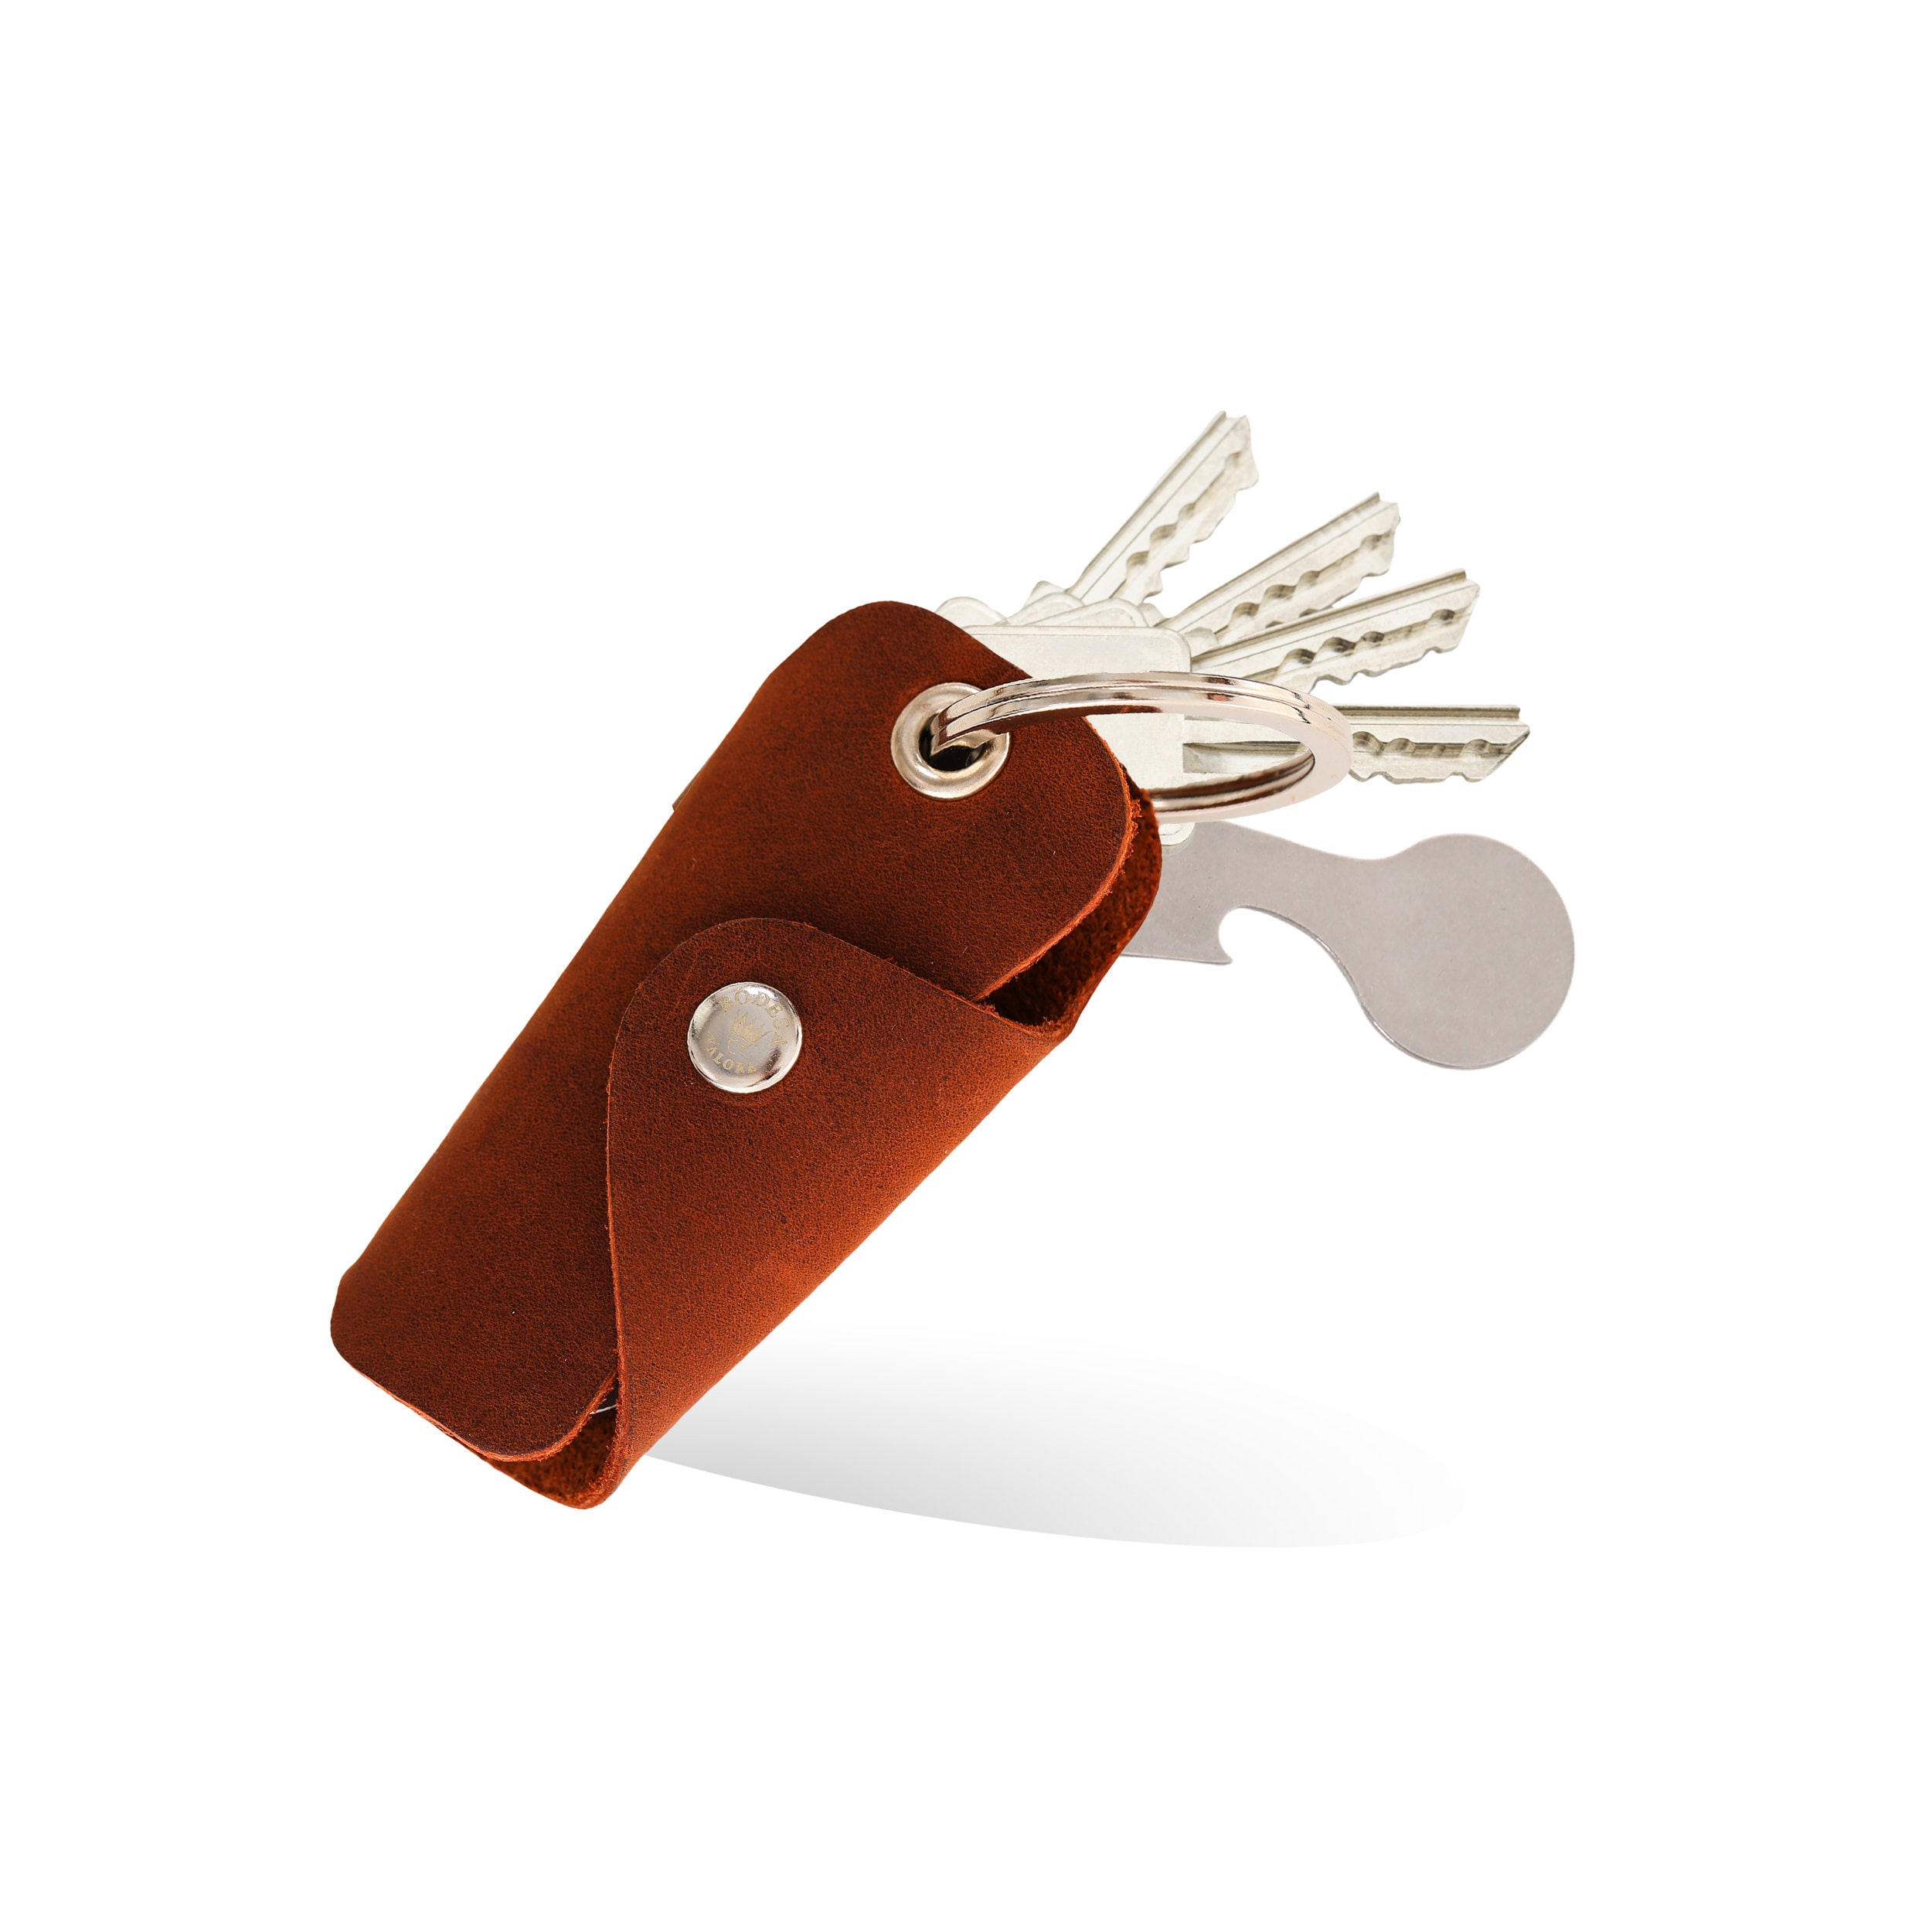 Key Organizer - Quality products with free shipping